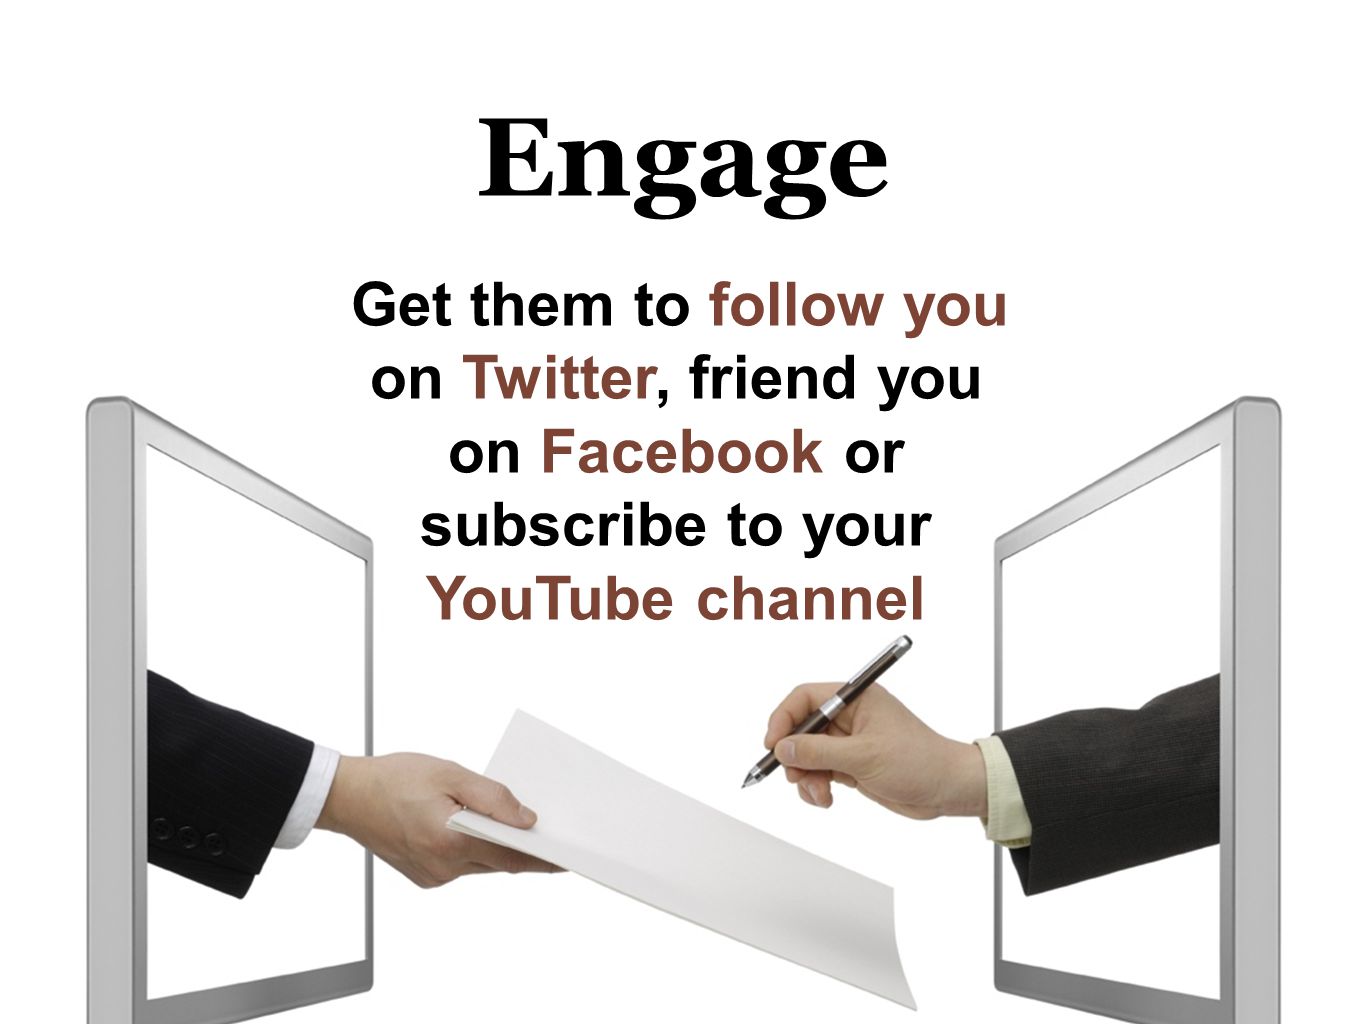 Engage Get them to follow you on Twitter, friend you on Facebook or subscribe to your YouTube channel